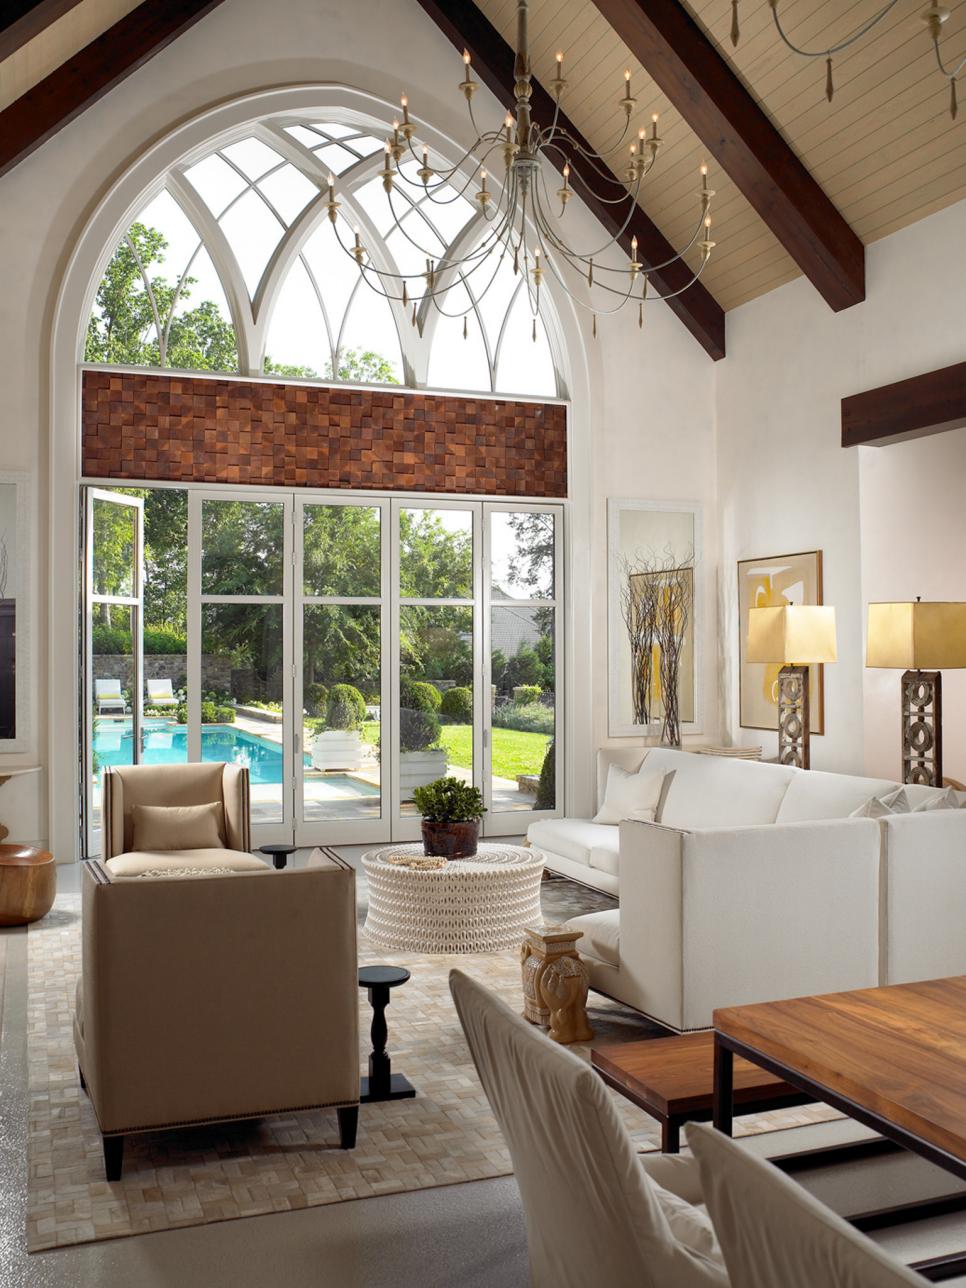 Great Room With Vaulted Ceiling & Thin Chandelier Overlooking Pool